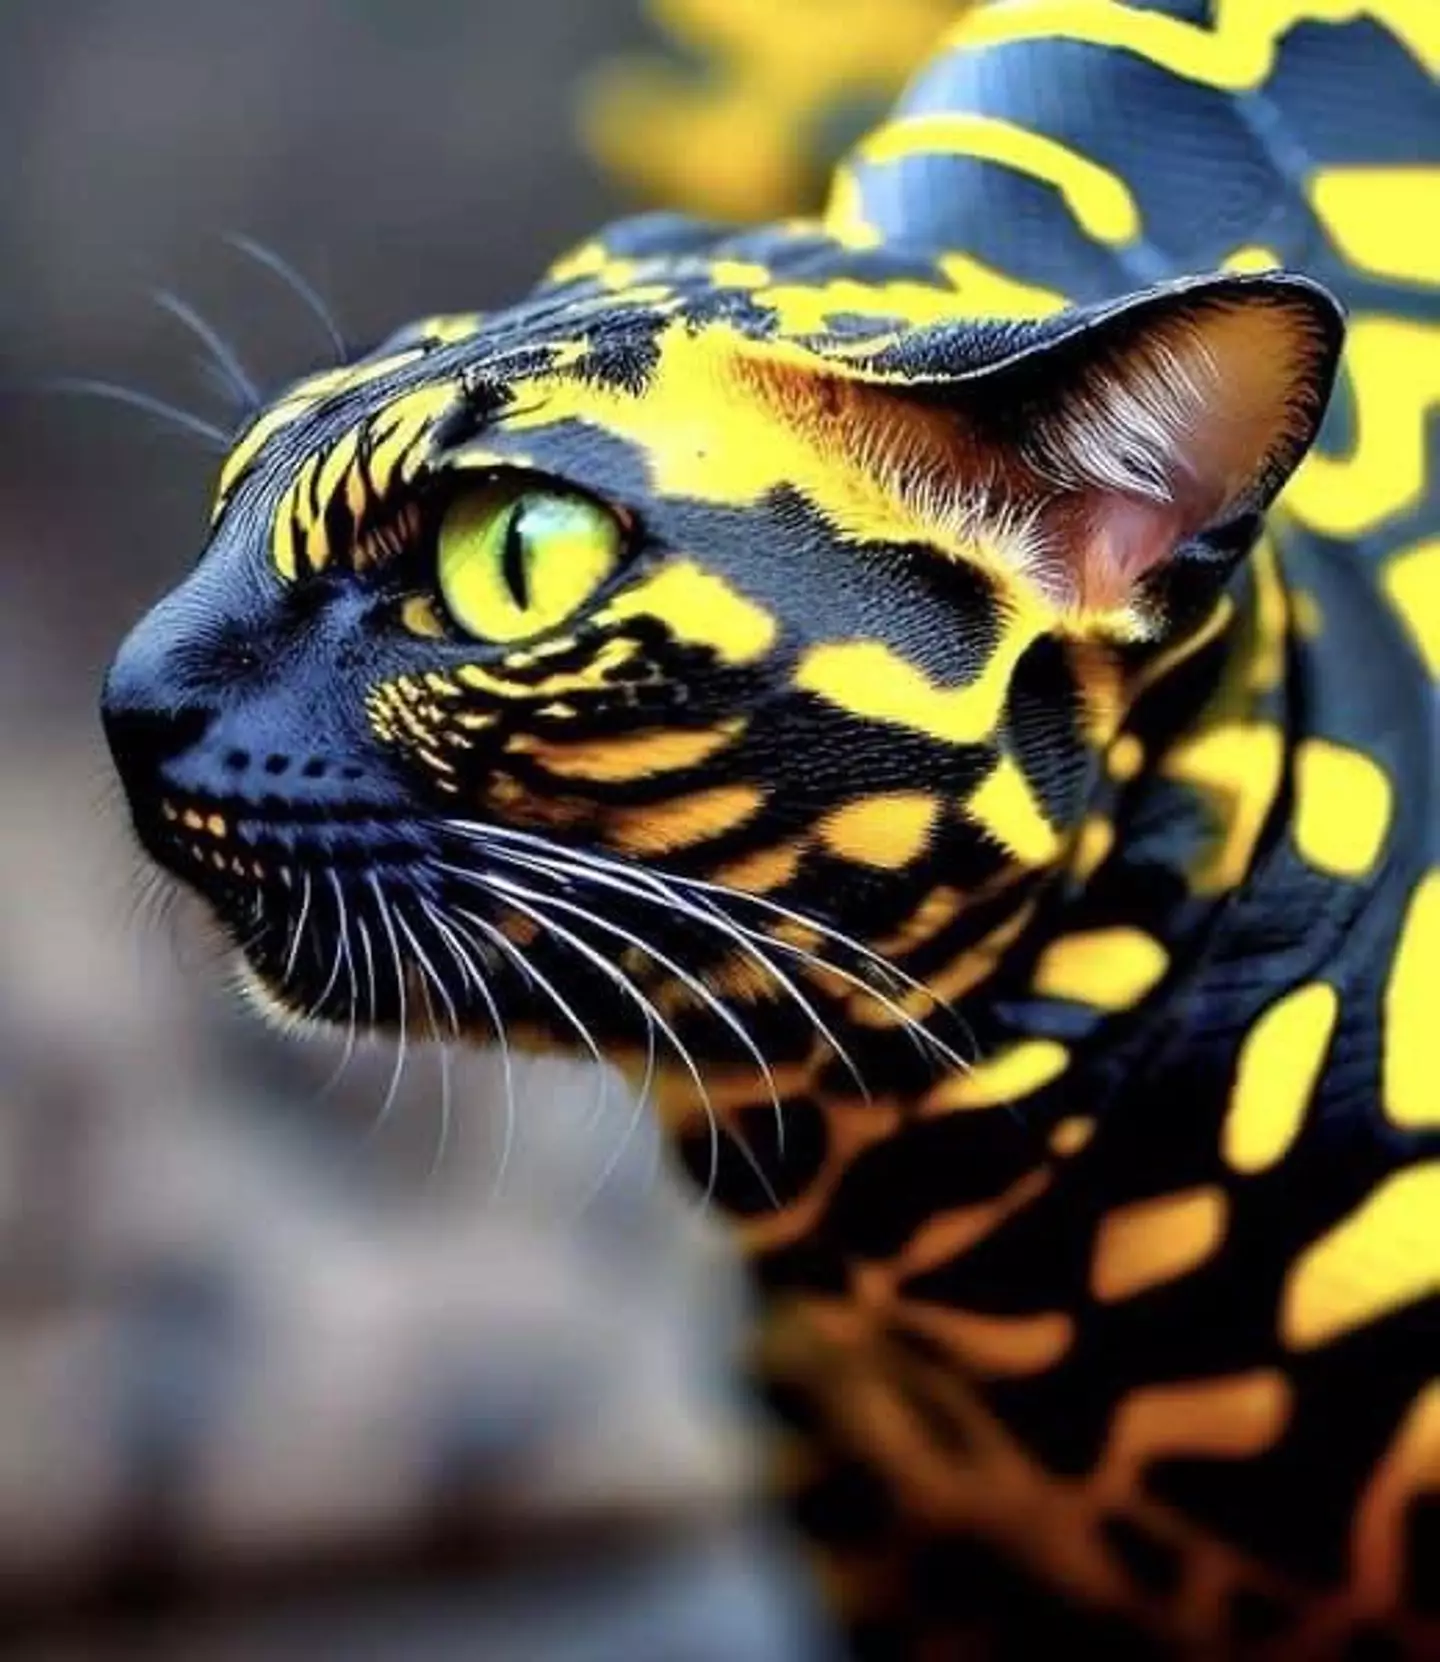 The truth behind the viral 'snake-cat' has finally been revealed.